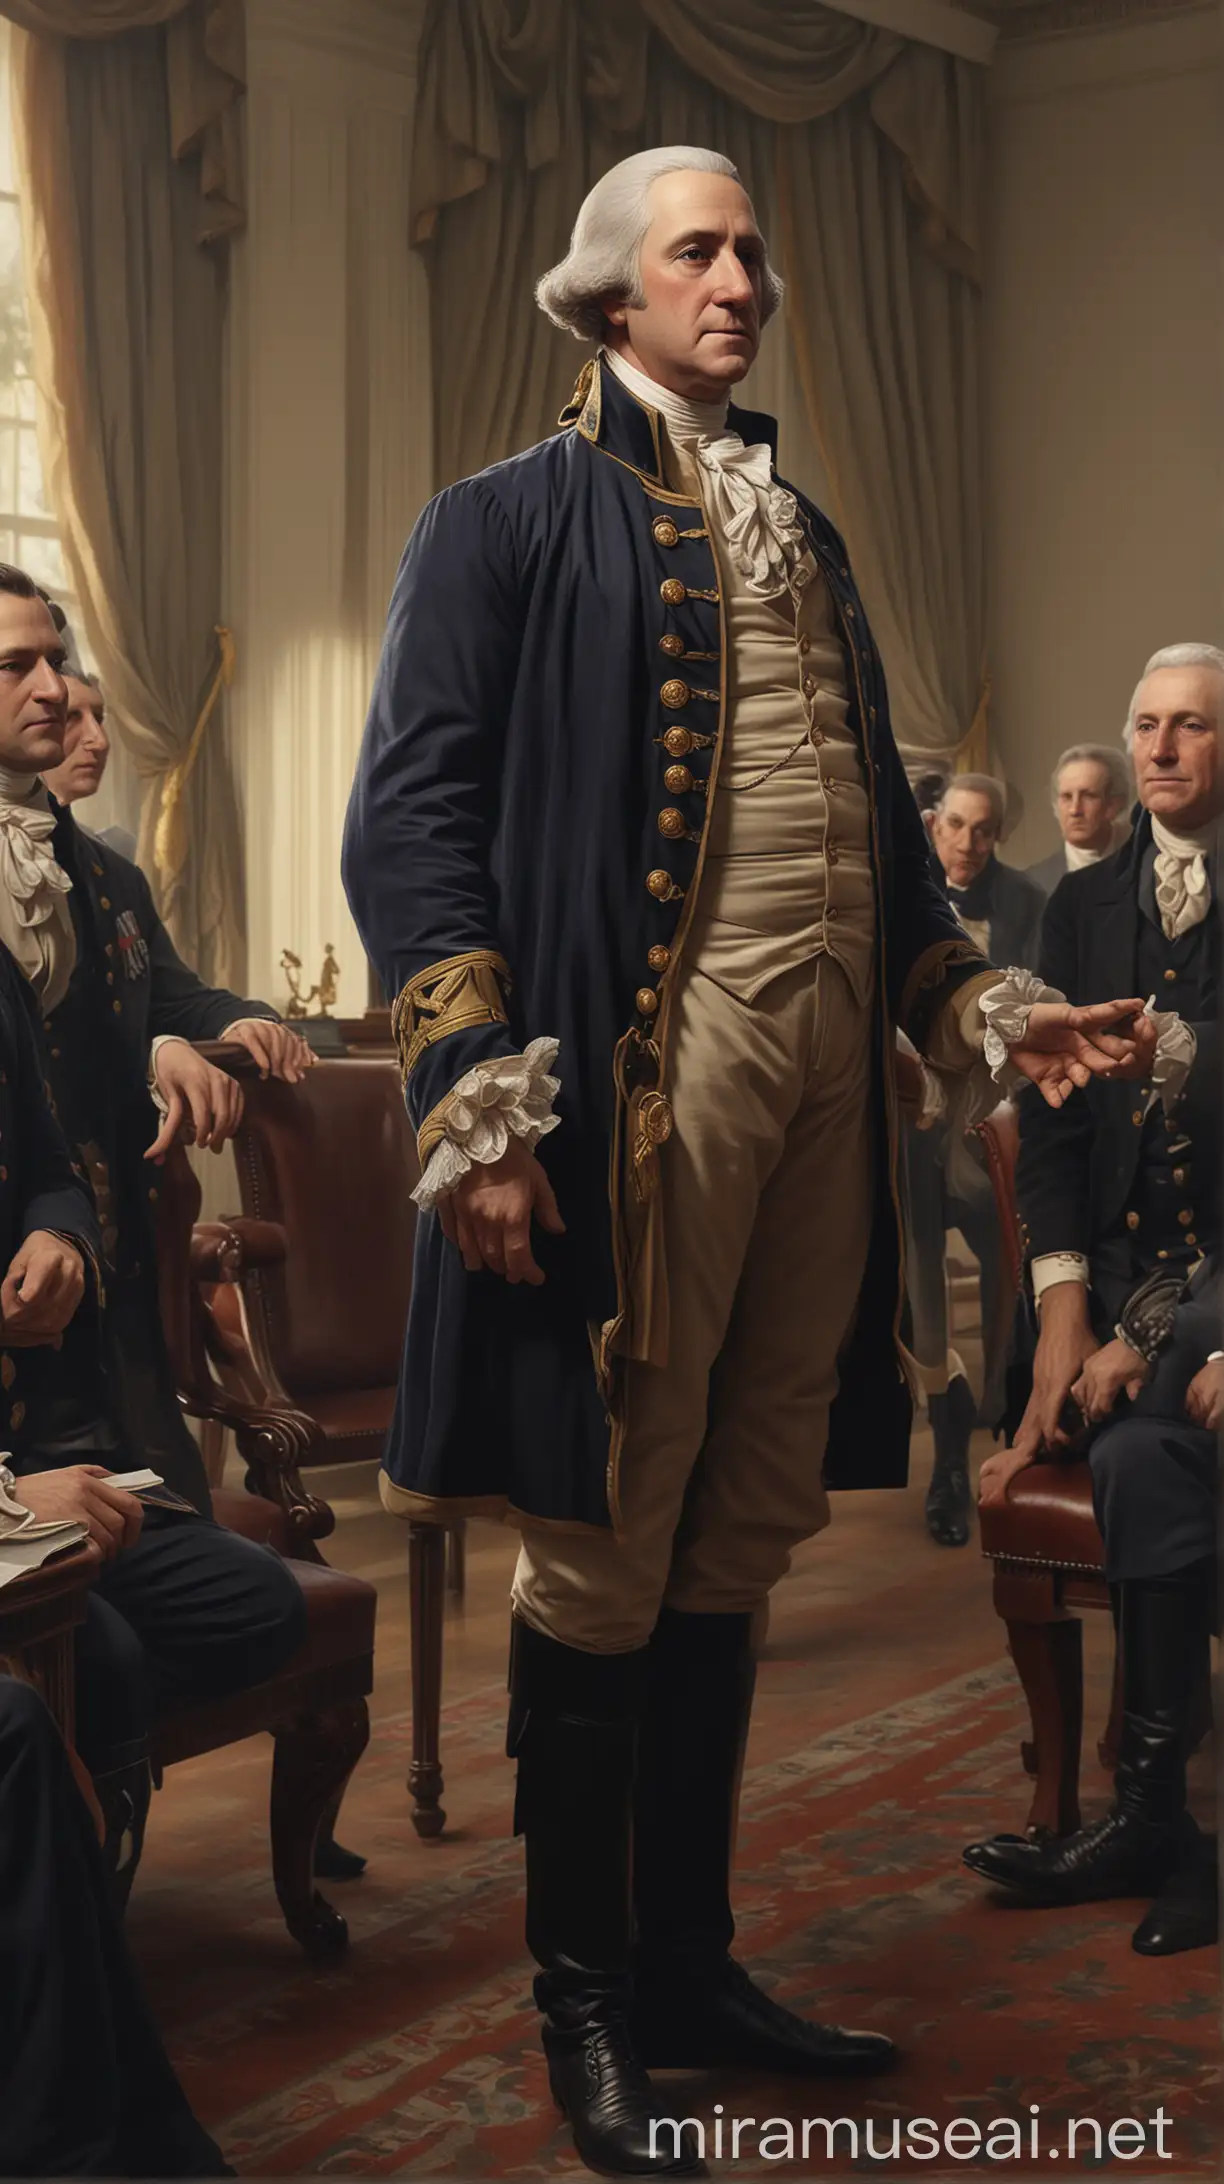 Depict Washington in his presidential role, leading meetings or addressing the public. hyper realistic